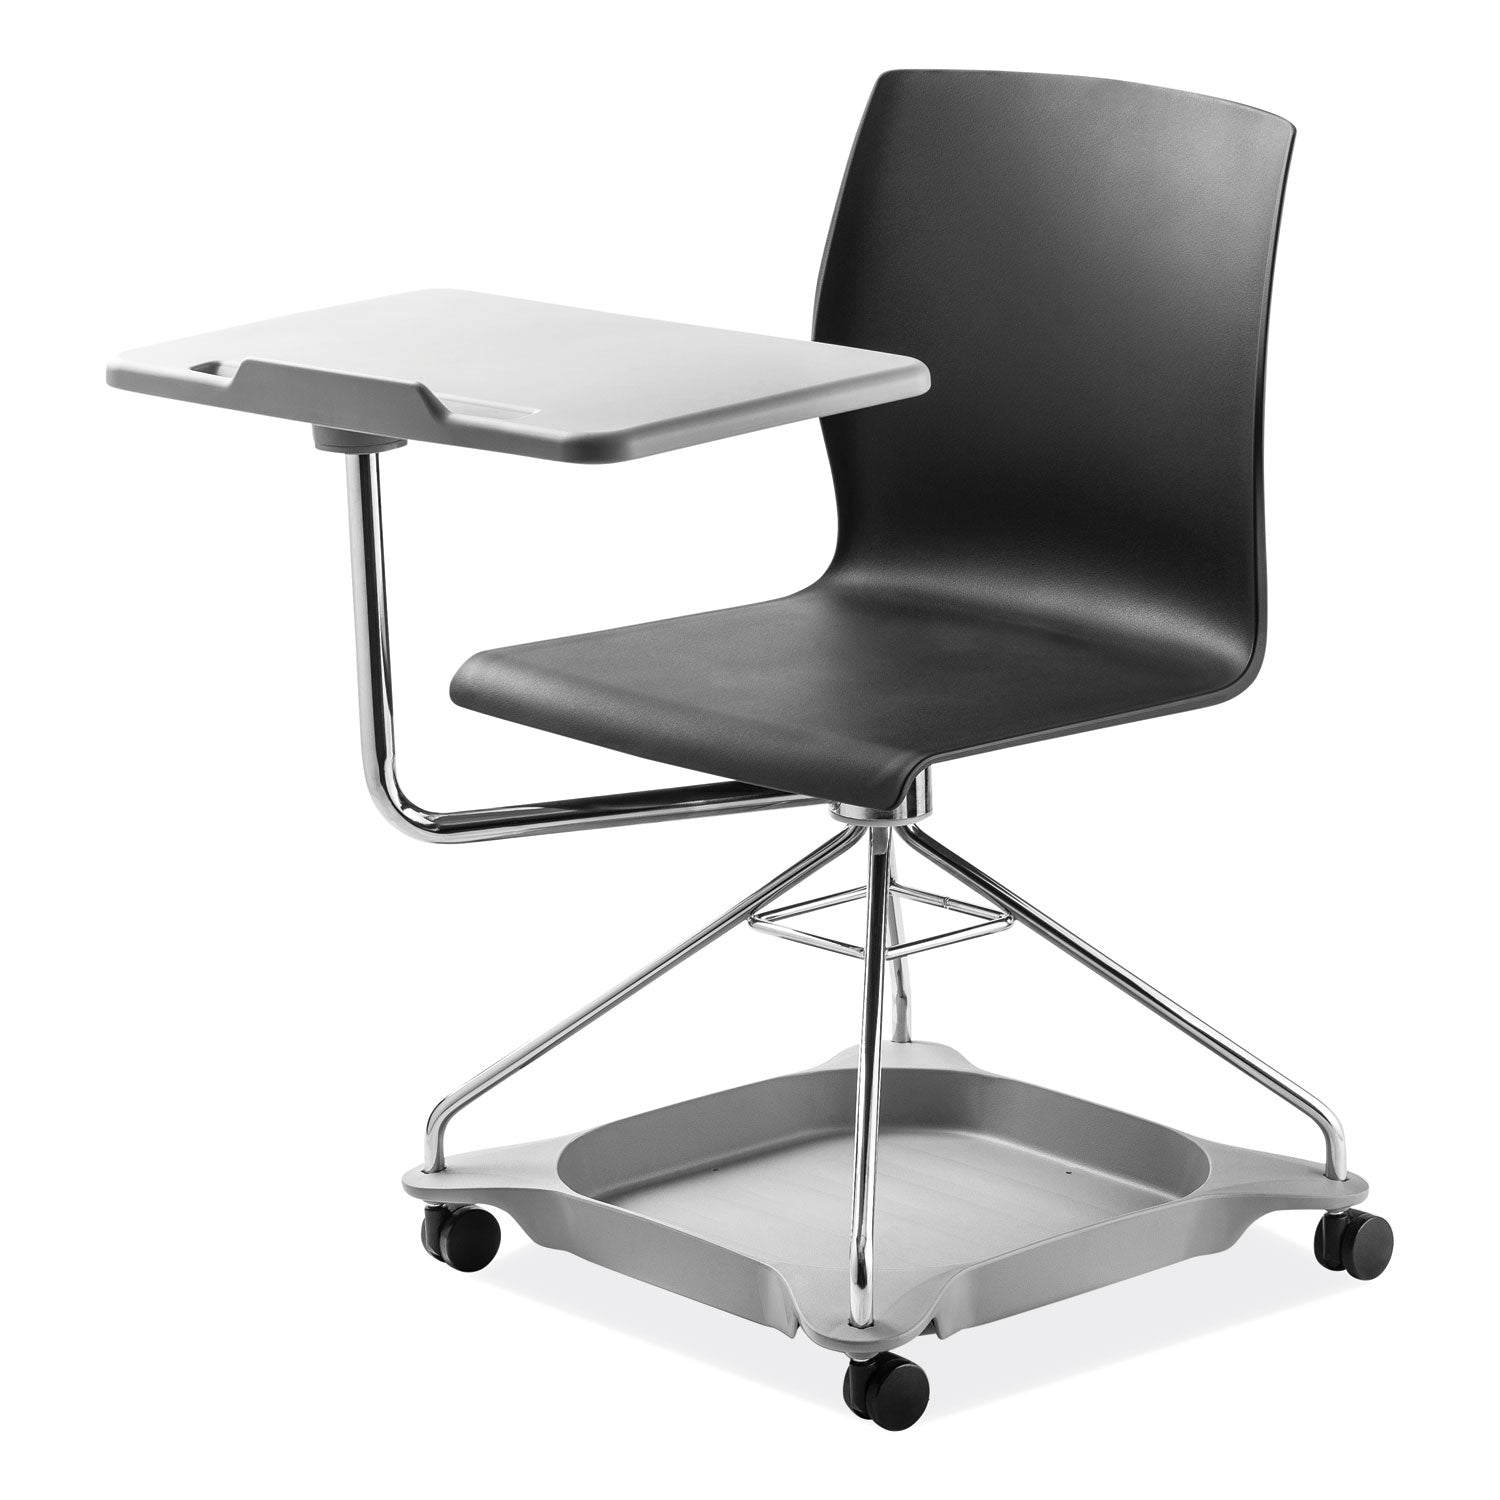 cogo-mobile-tablet-chair-supports-up-to-440-lb-1875-seat-height-black-seat-back-chrome-frameships-in-1-3-business-days_npscogo10 - 1